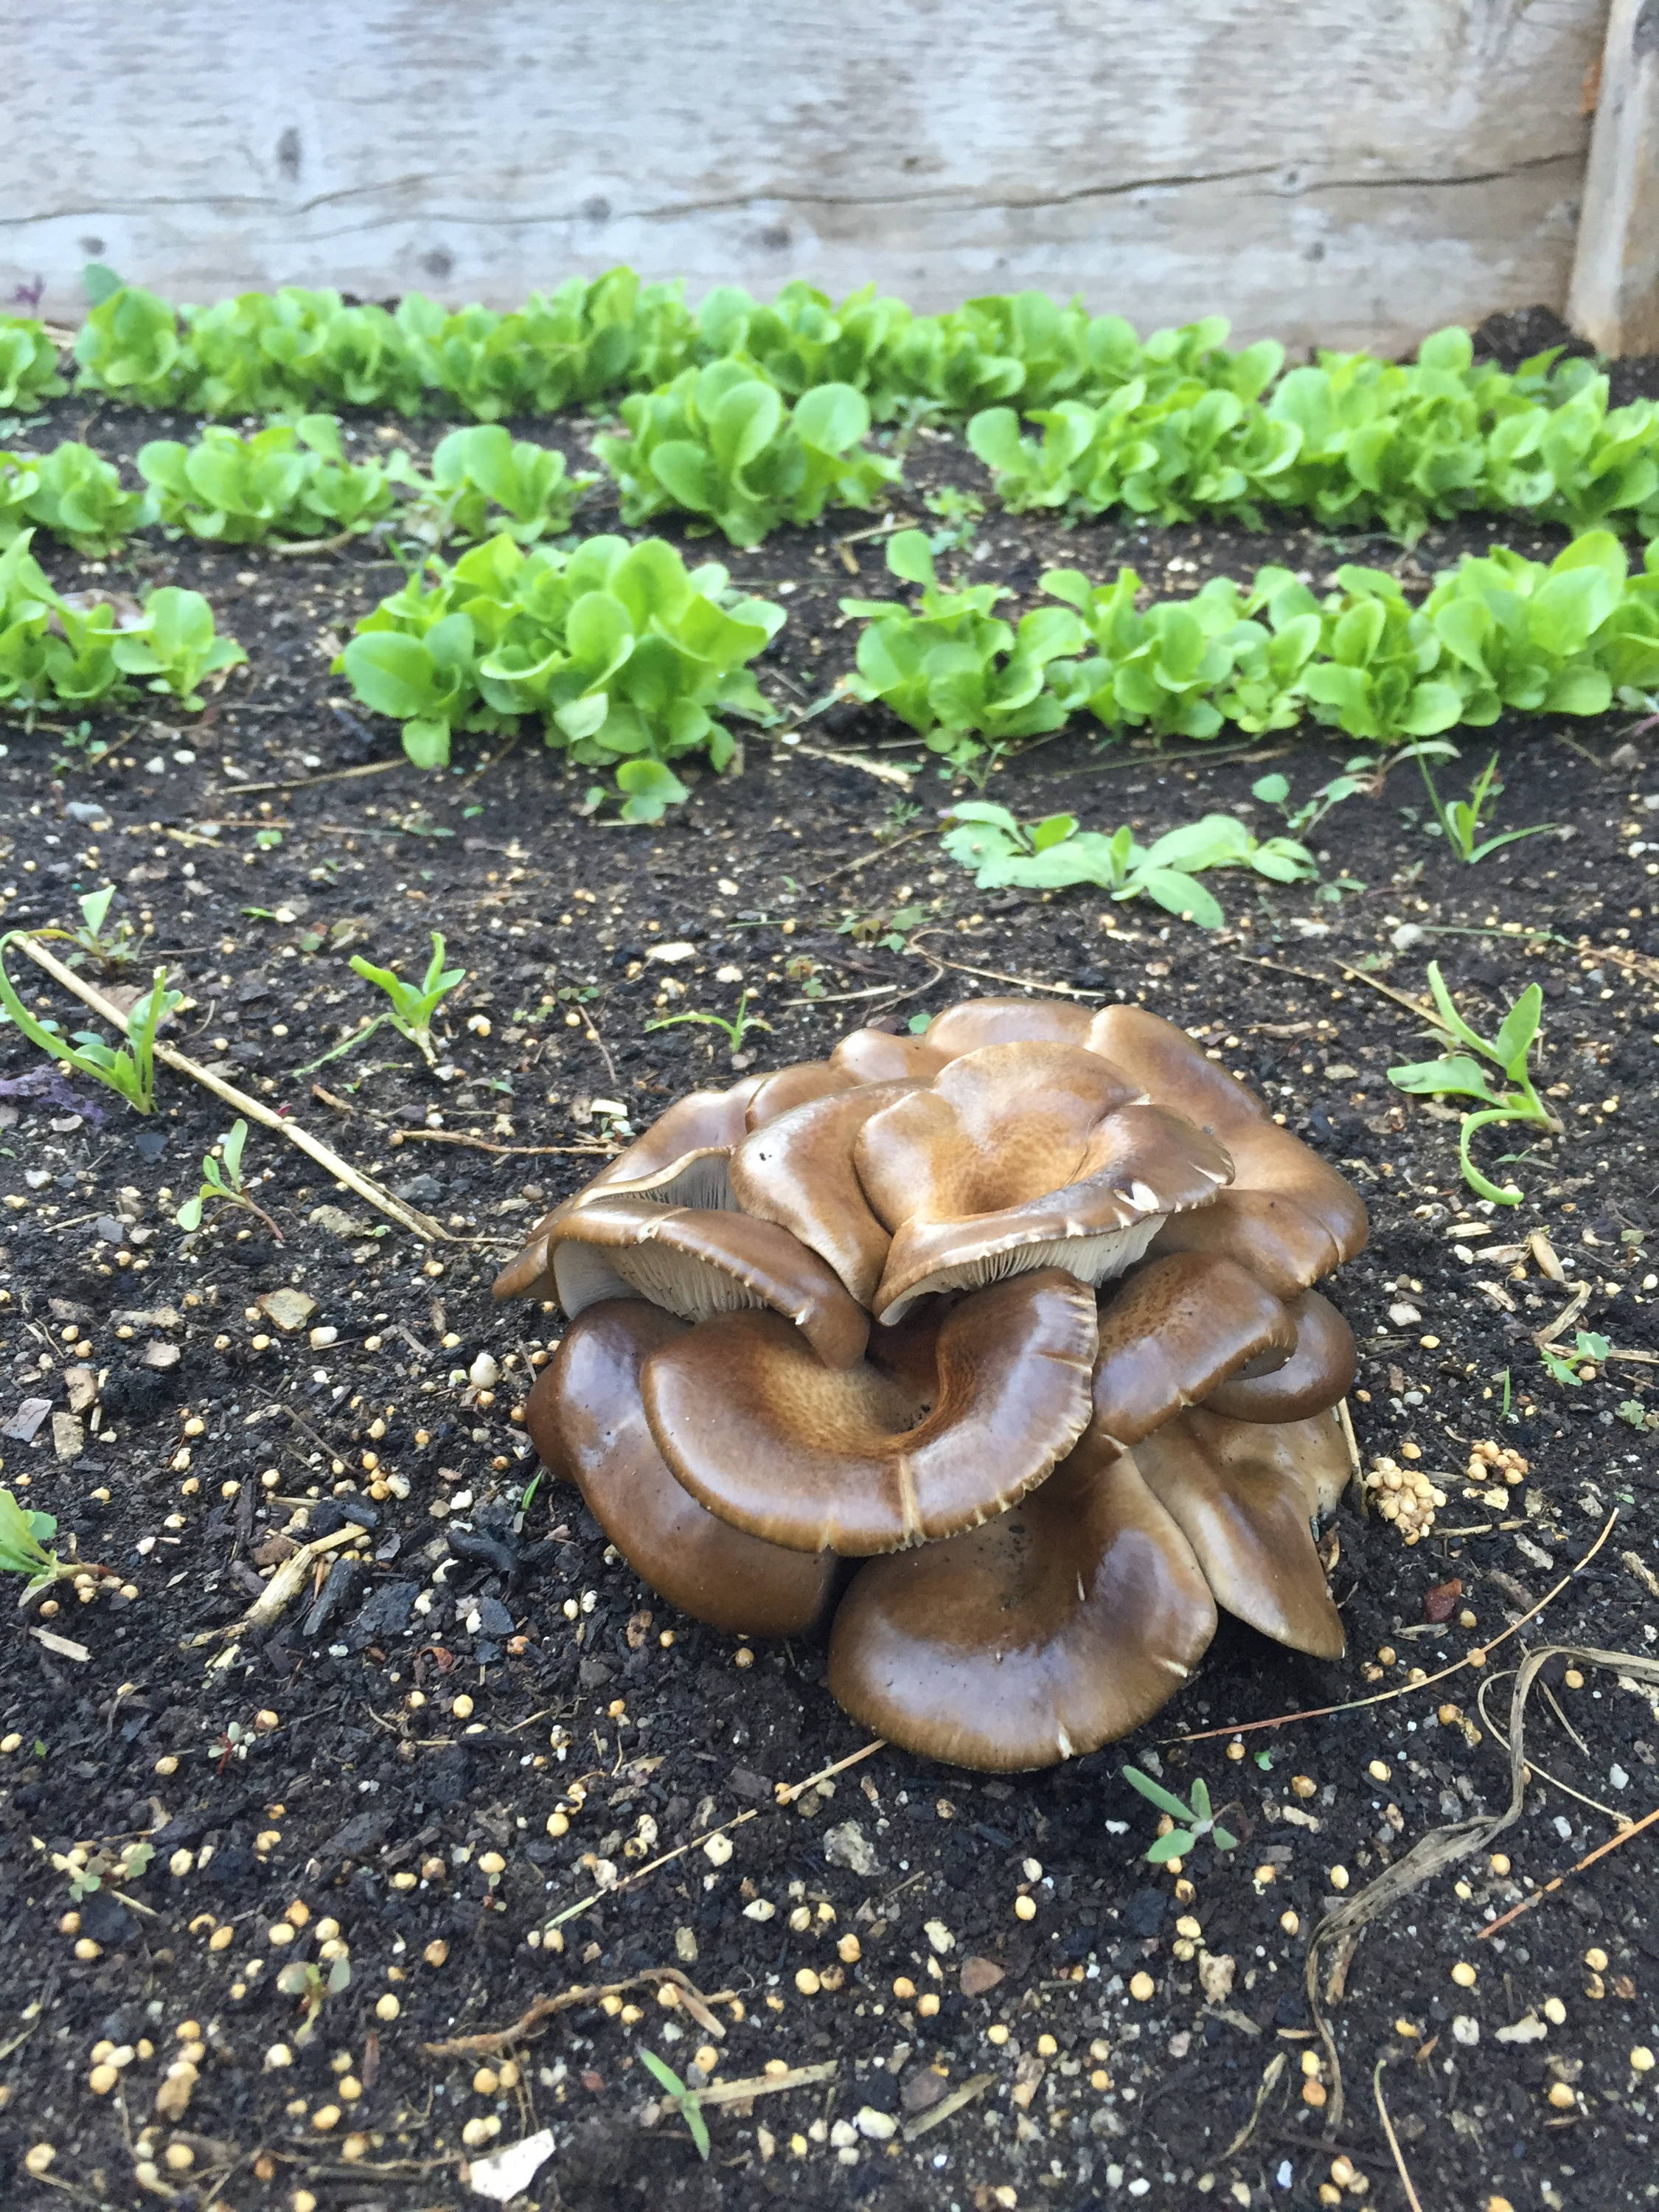 How to Grow Your Own Oyster Mushrooms on Straw - The Permaculture